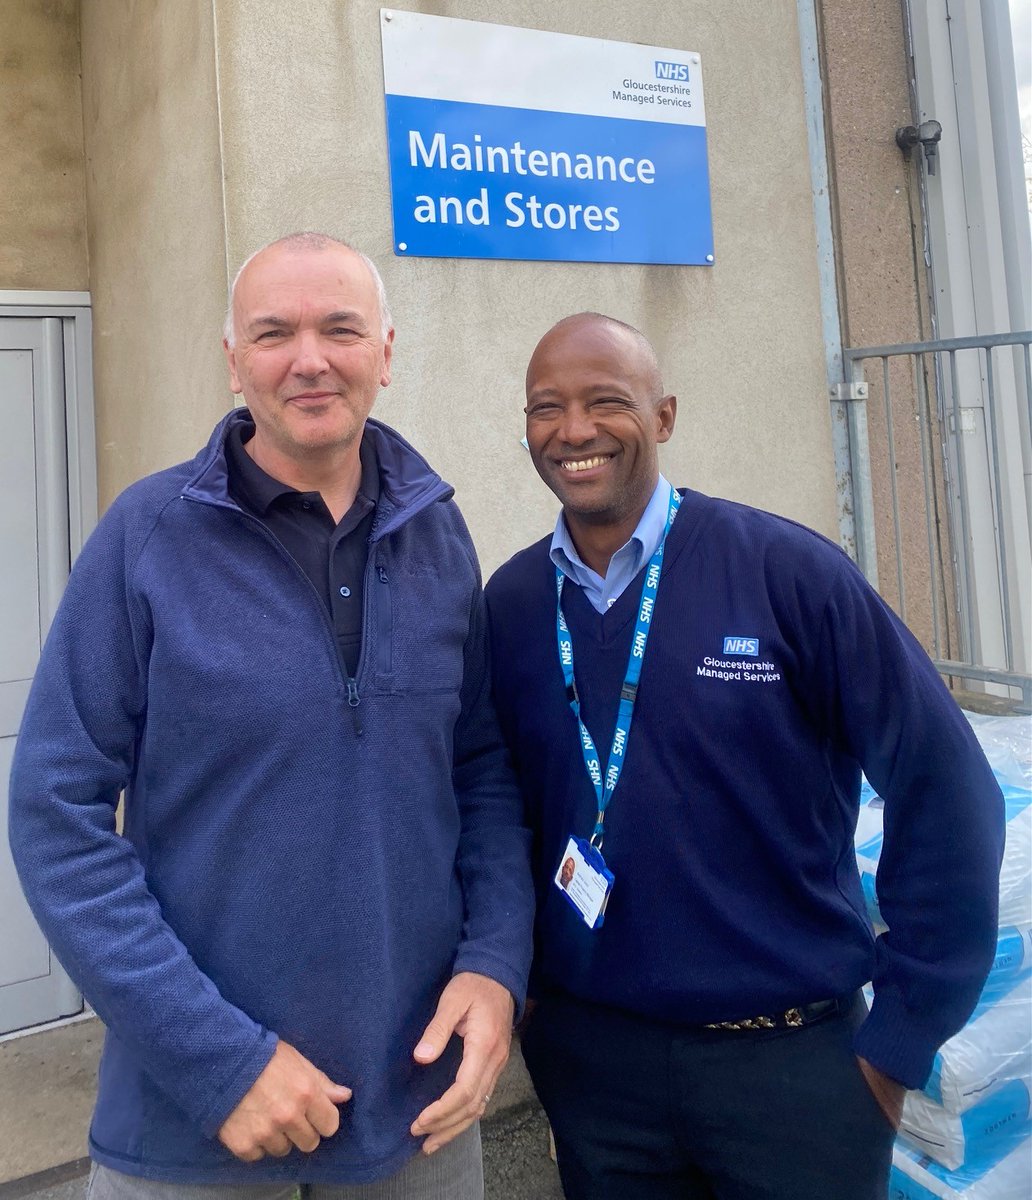 🥳 Celebrating 25 years at Gloucestershire Hospital Foundation Trust ✨ Chris Gough and Adrian Weir both joined the Trust 25 years ago. Join us in congratulating them for 25 years of service to the NHS 👏